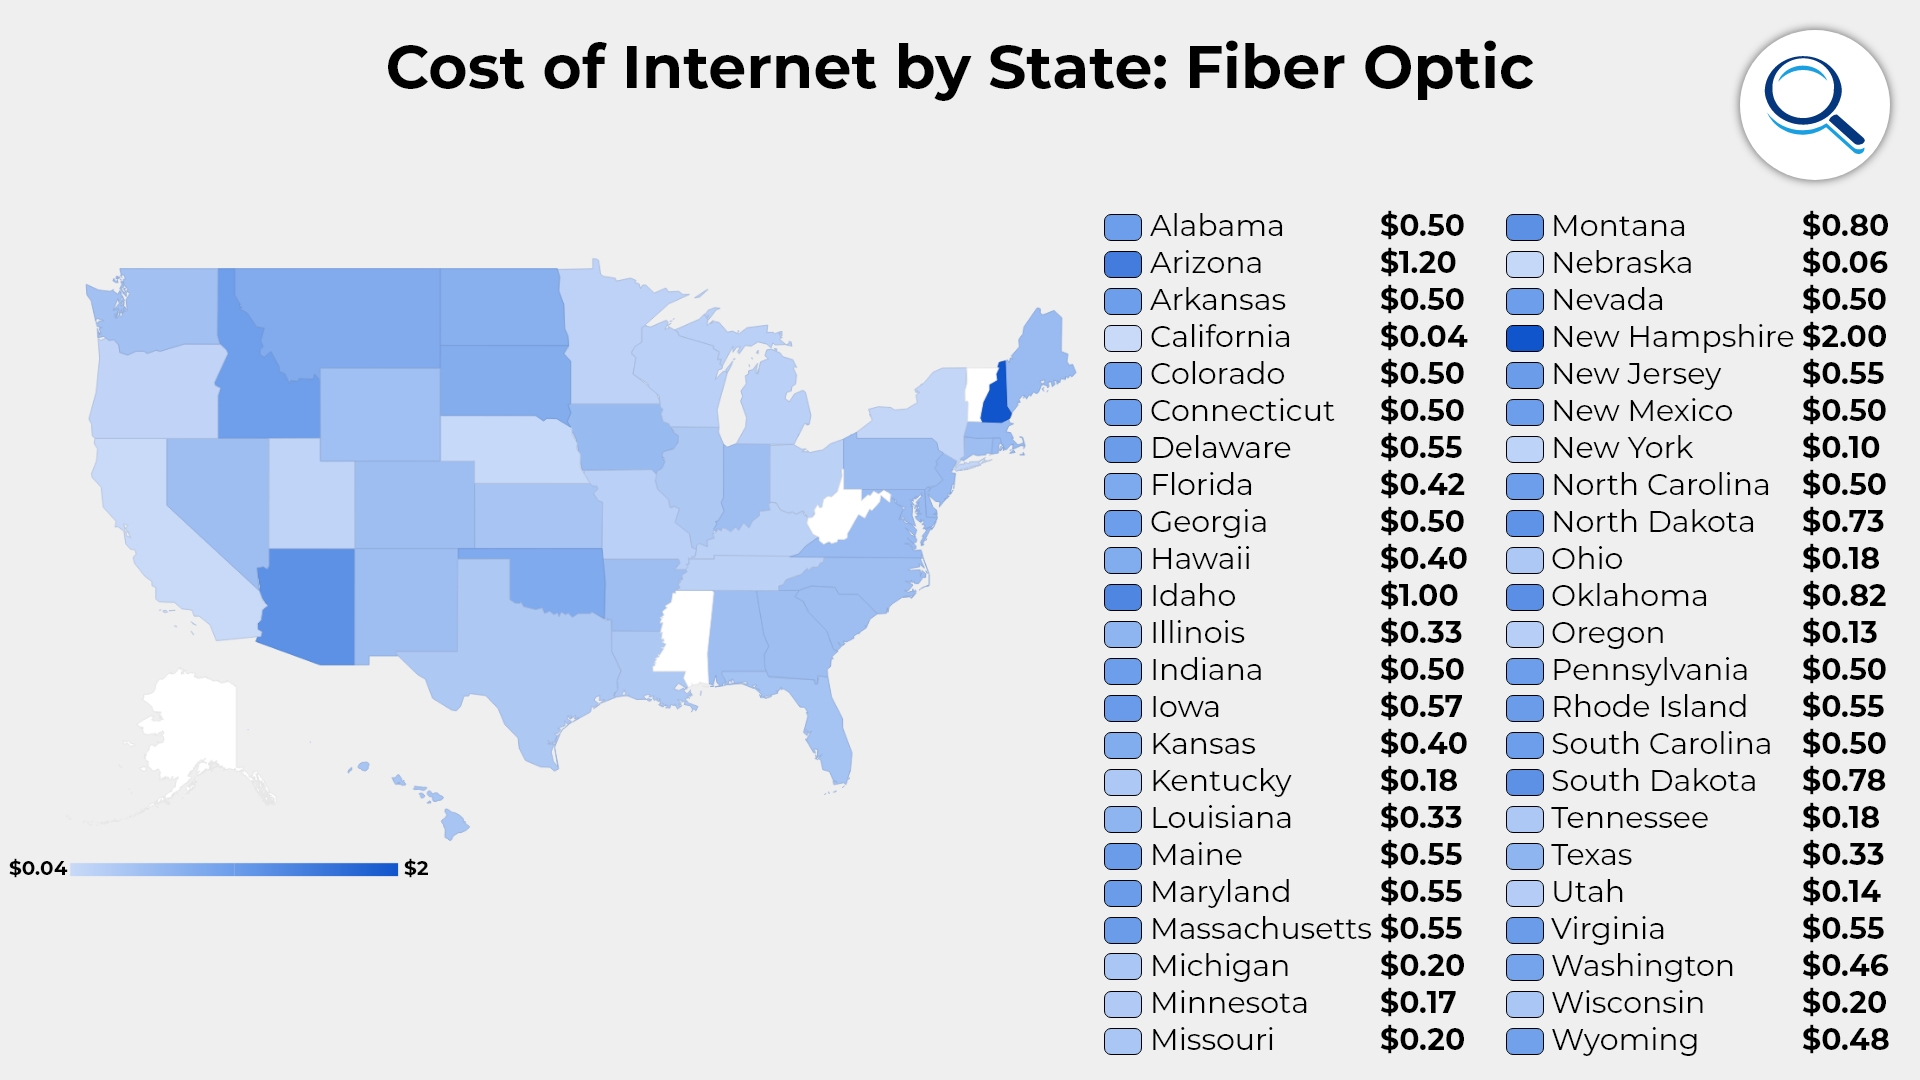 The Cost of Internet by State in the USA